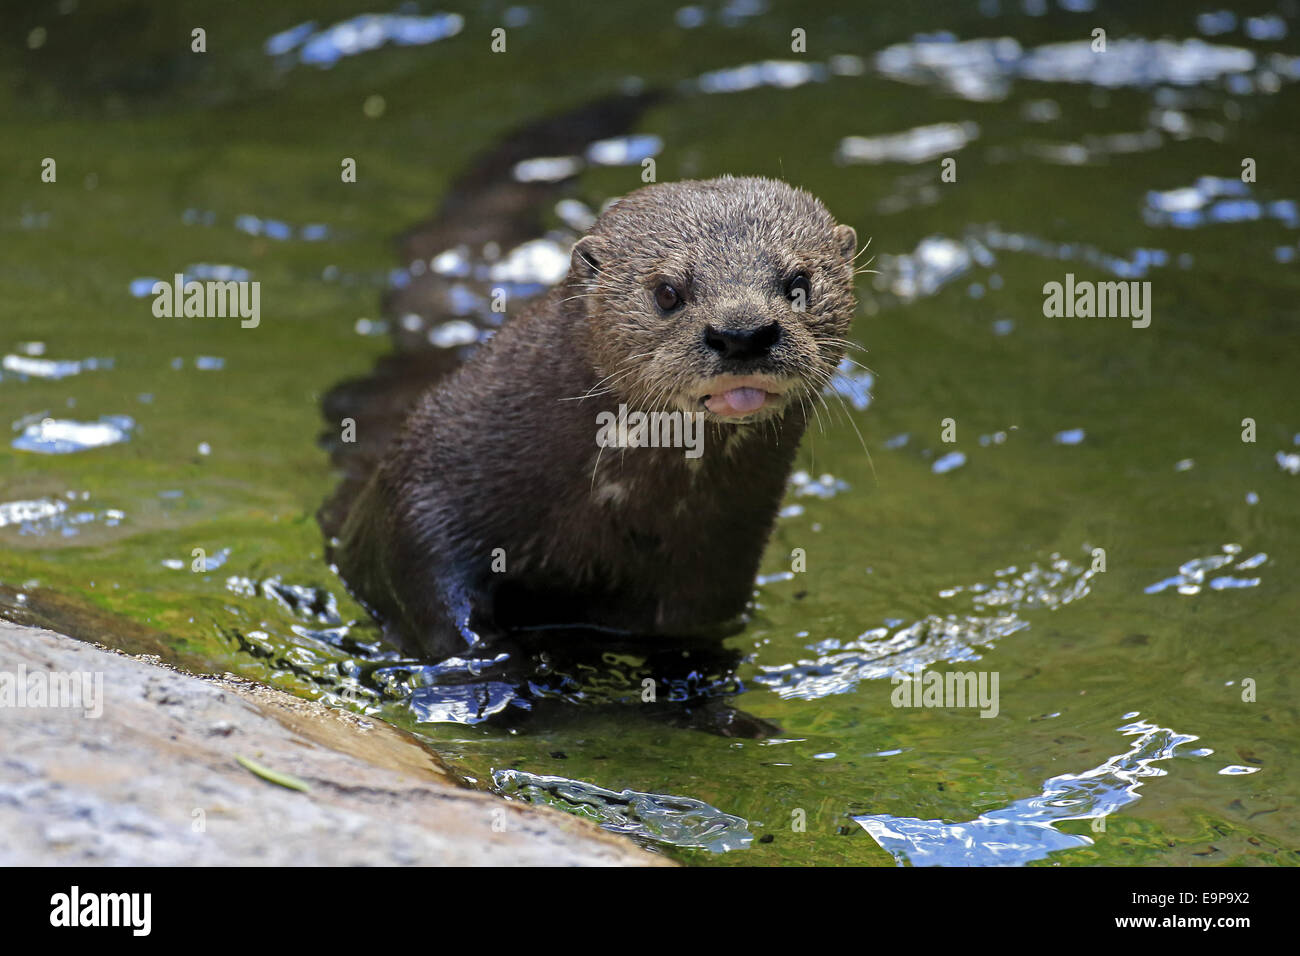 Spotted-necked Otter (Hydrictis maculicollis) adult, standing in shallow water, Eastern Cape, South Africa, December (captive) Stock Photo